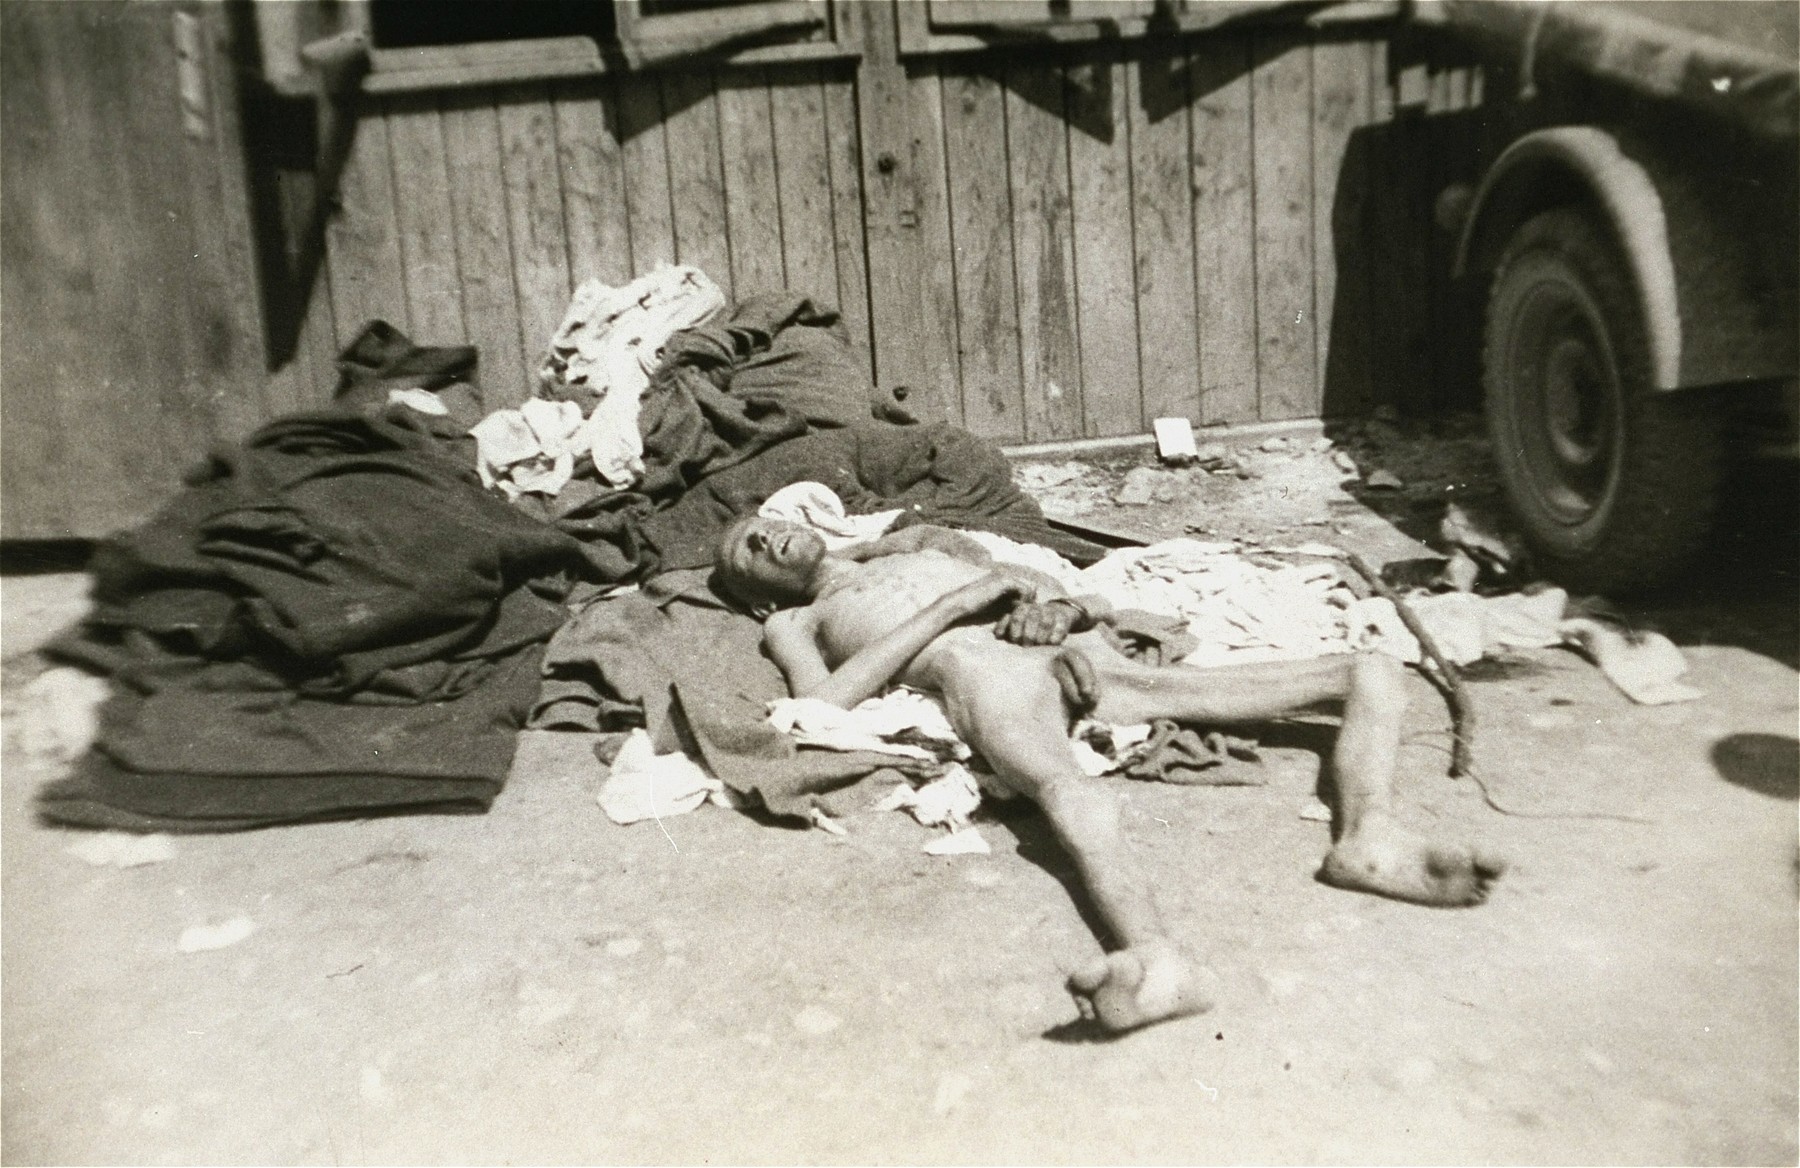 A former prisoner lies outside a barracks in the newly liberated Ebensee concentration camp.  It is not clear if he is alive or dead.